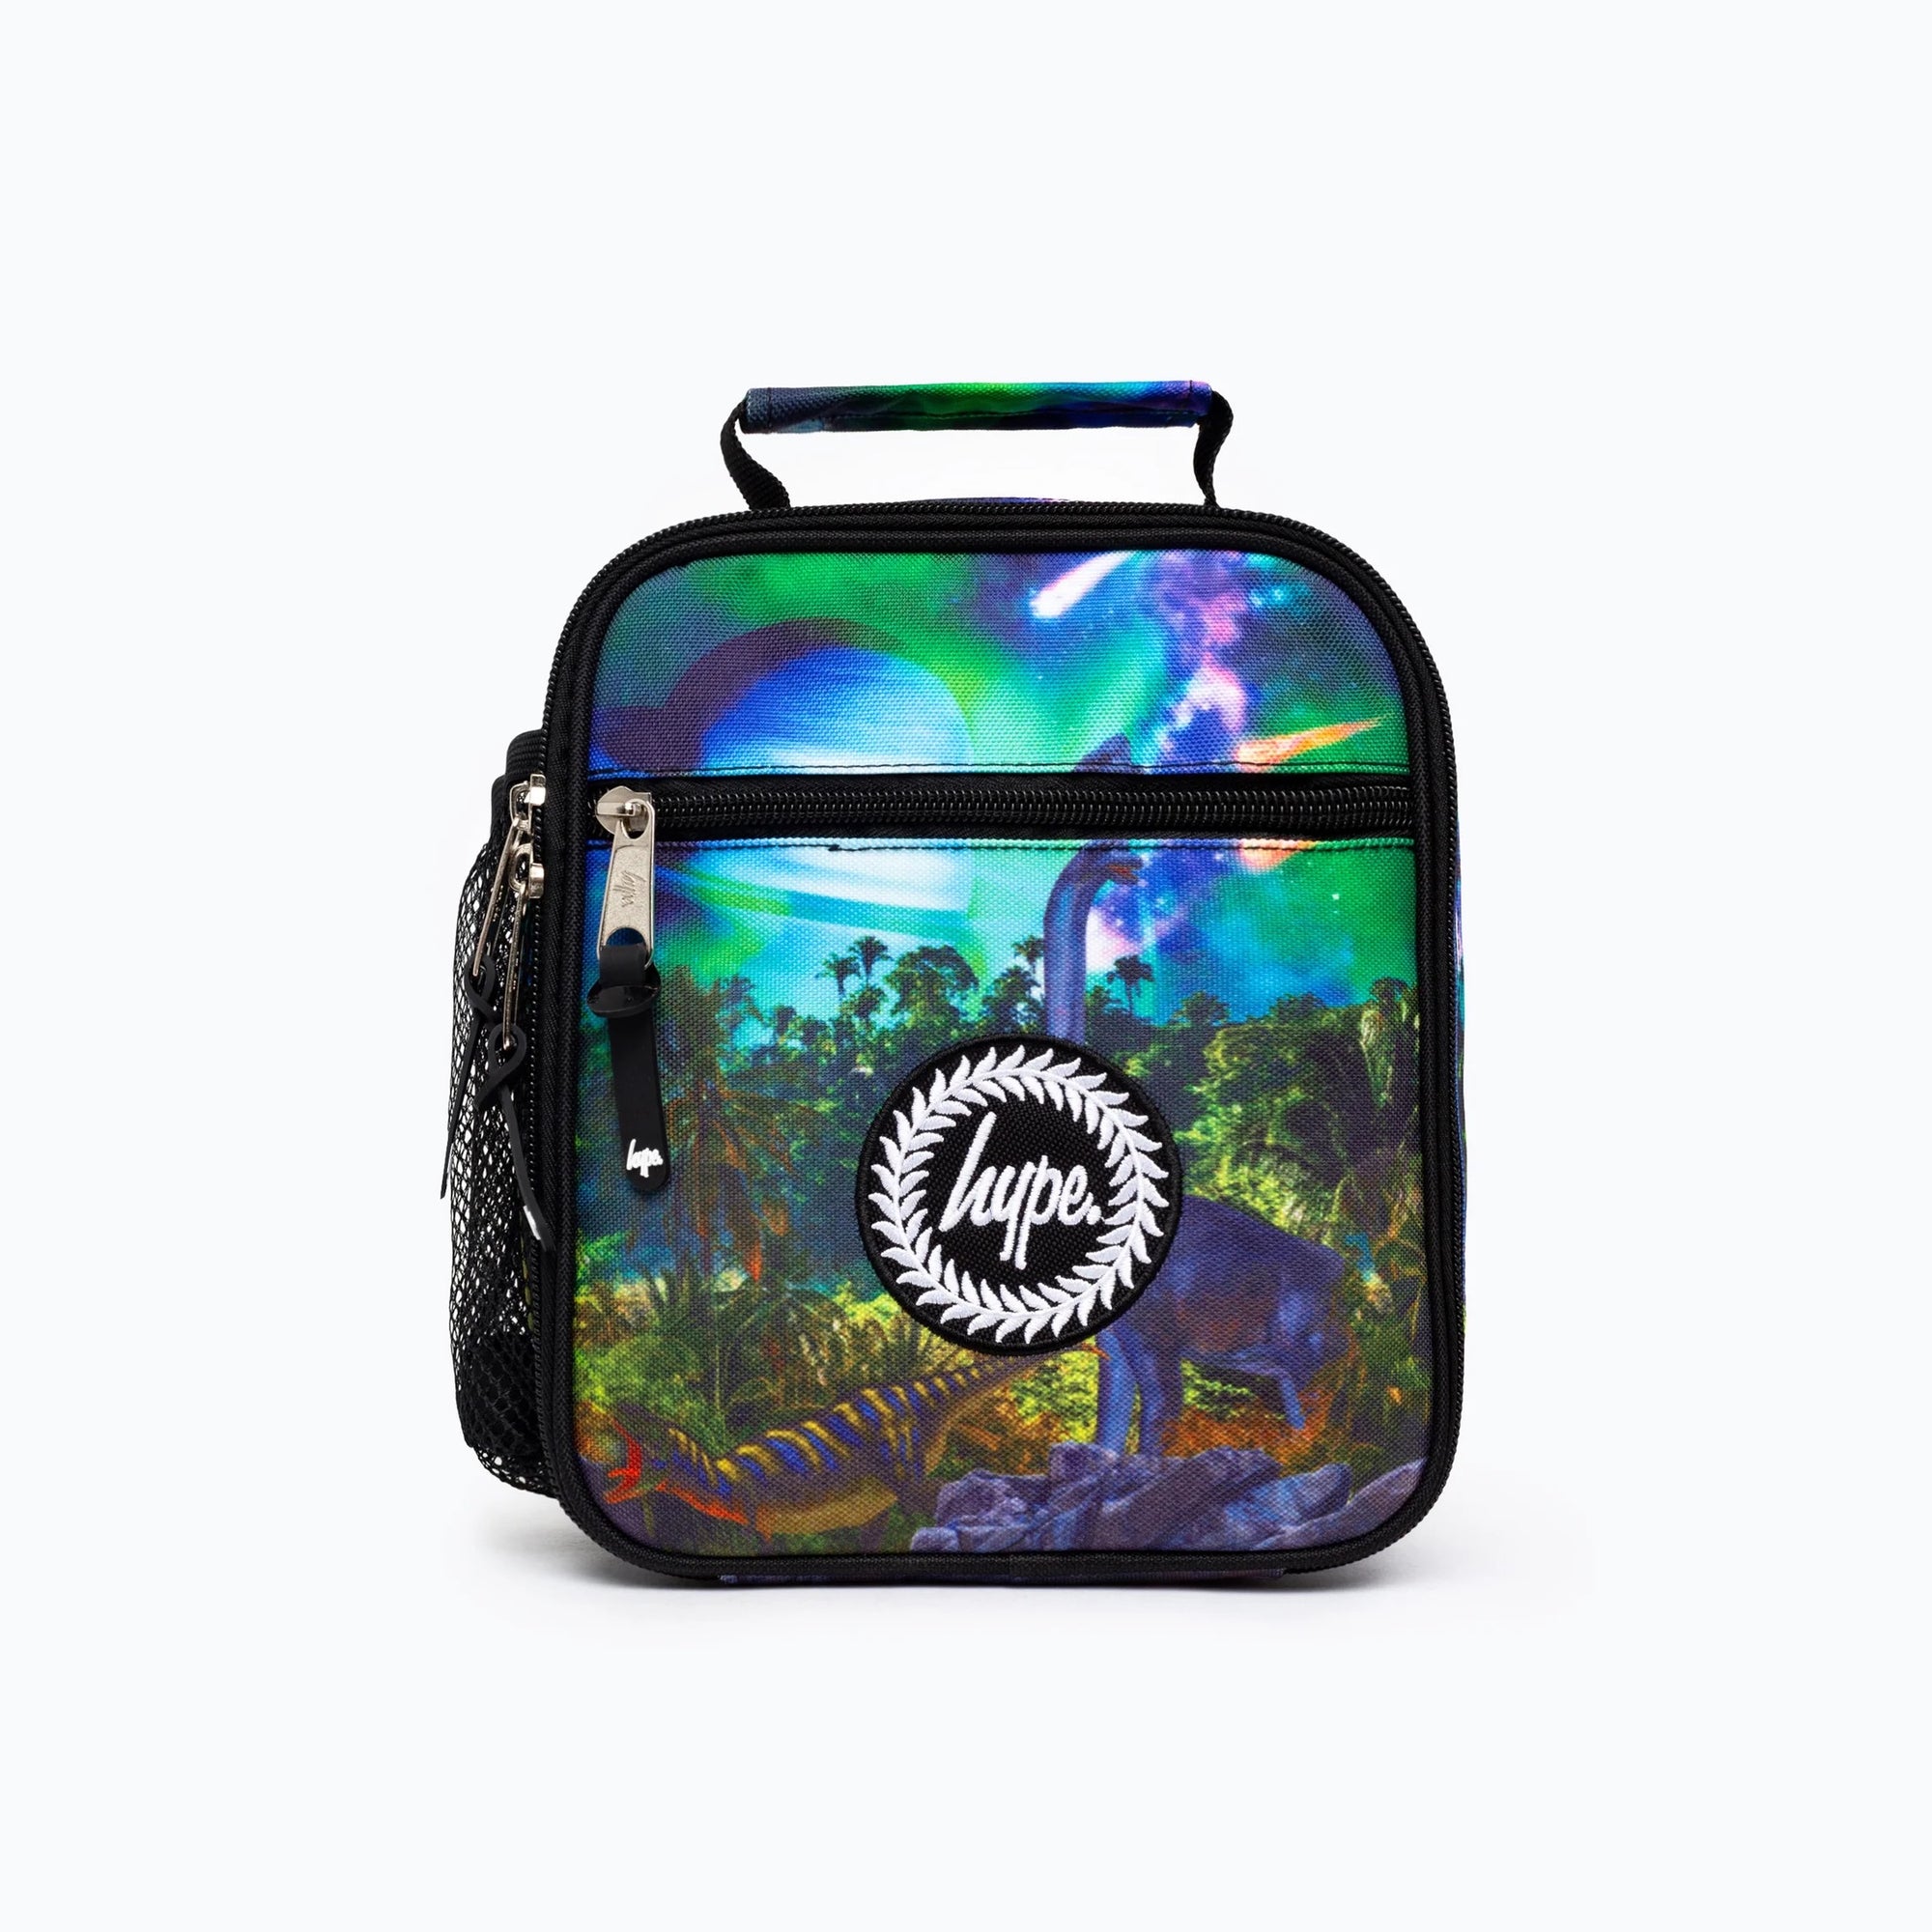 Hype Space Extinction Lunch Bag Xucb-191 Accessories ONE SIZE / Green